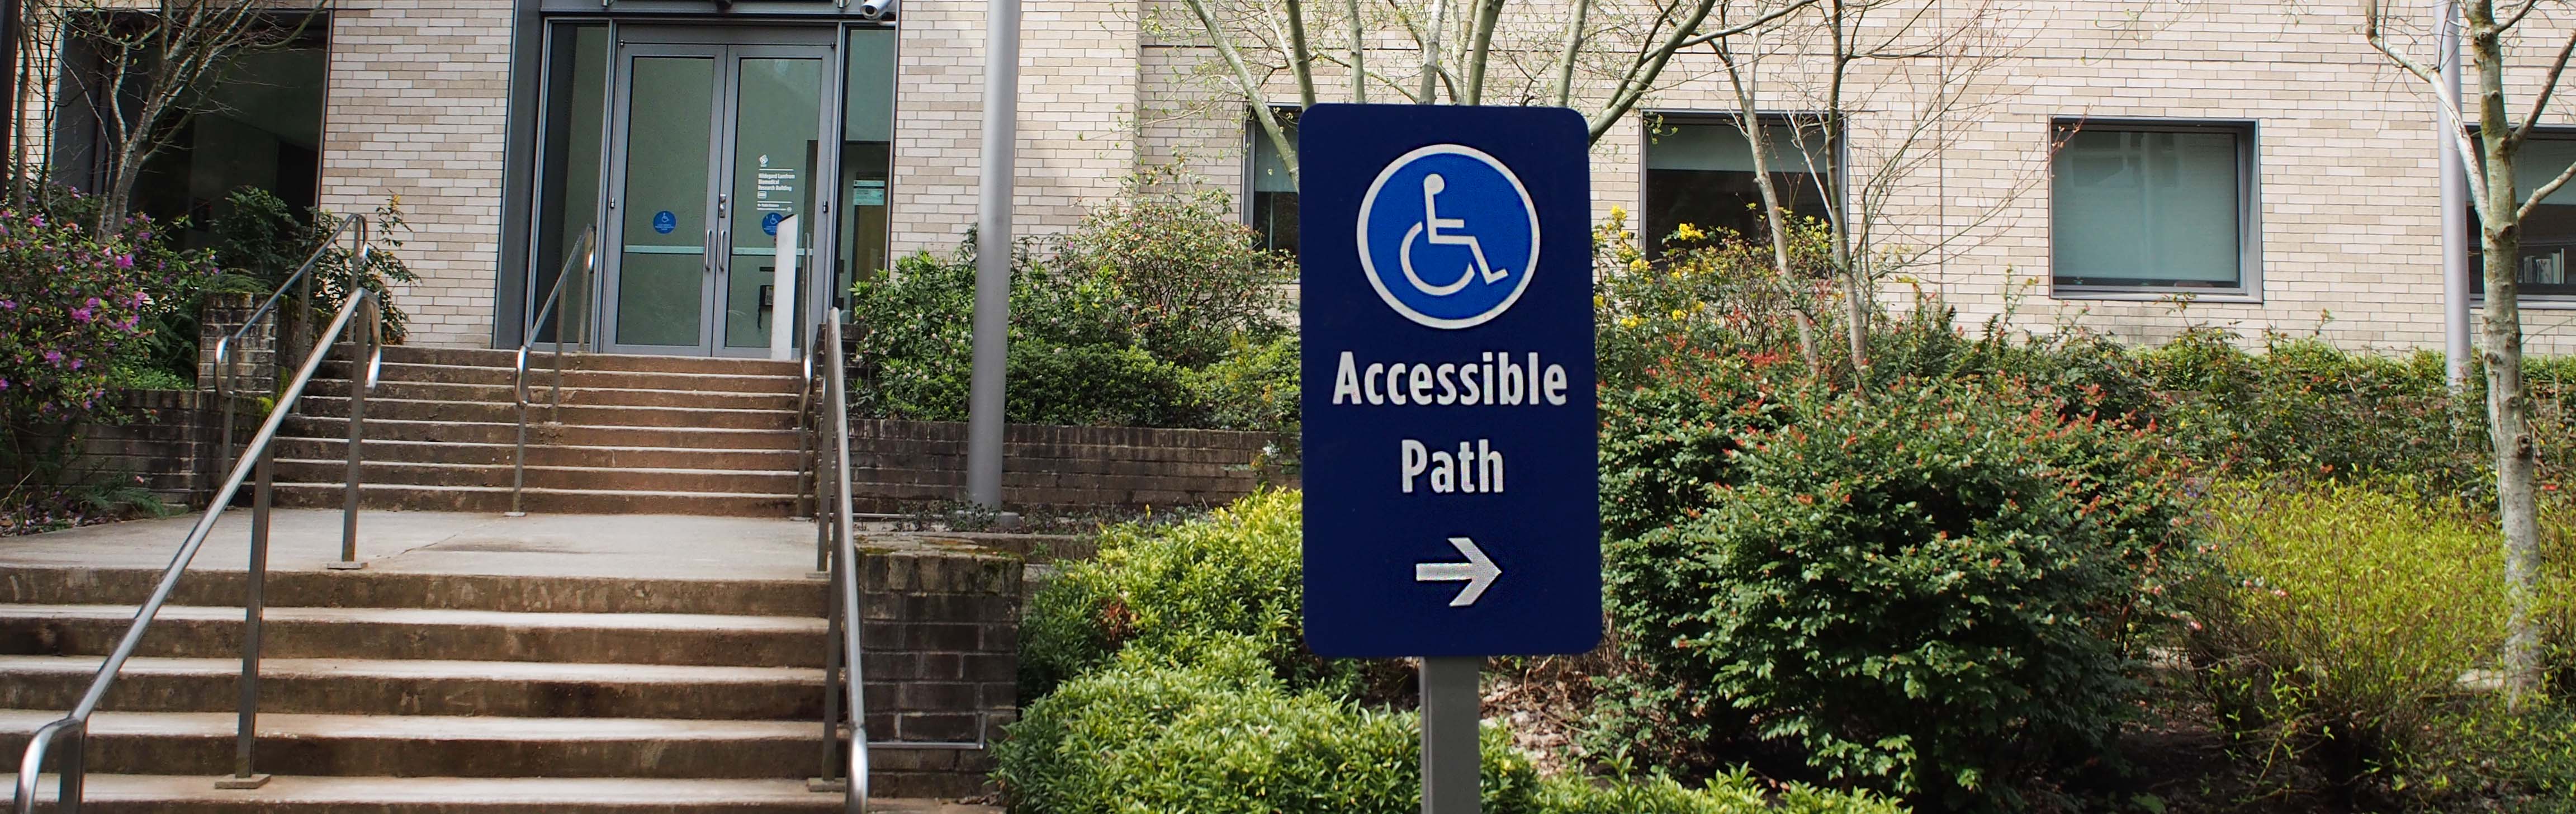 Accessible path